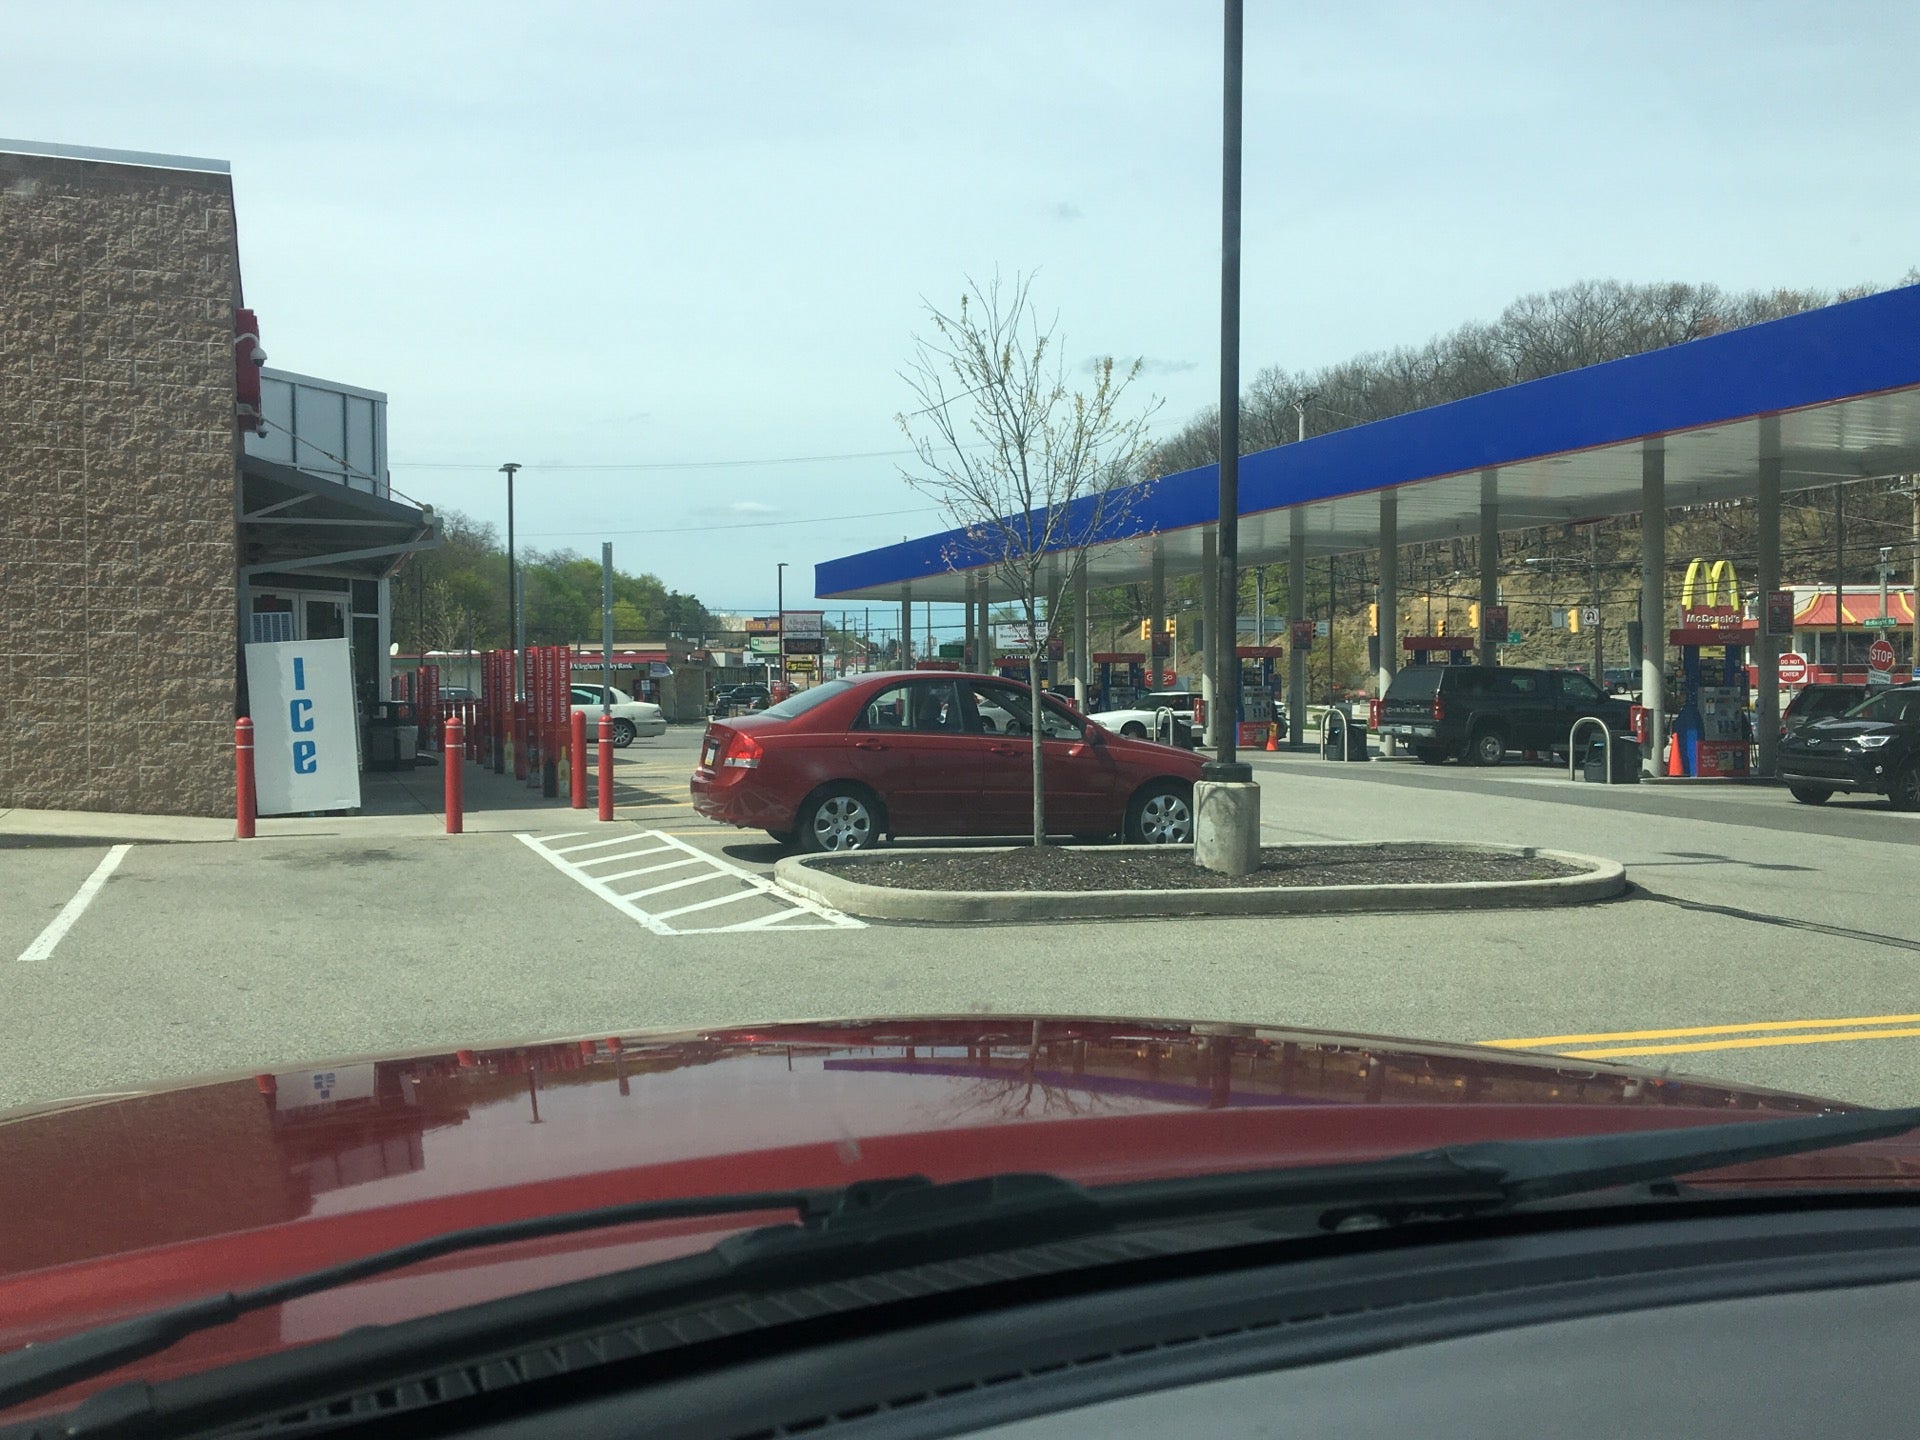 GetGo Cafe + Market, 3247 E Carson St, Pittsburgh, PA, Gas Stations -  MapQuest